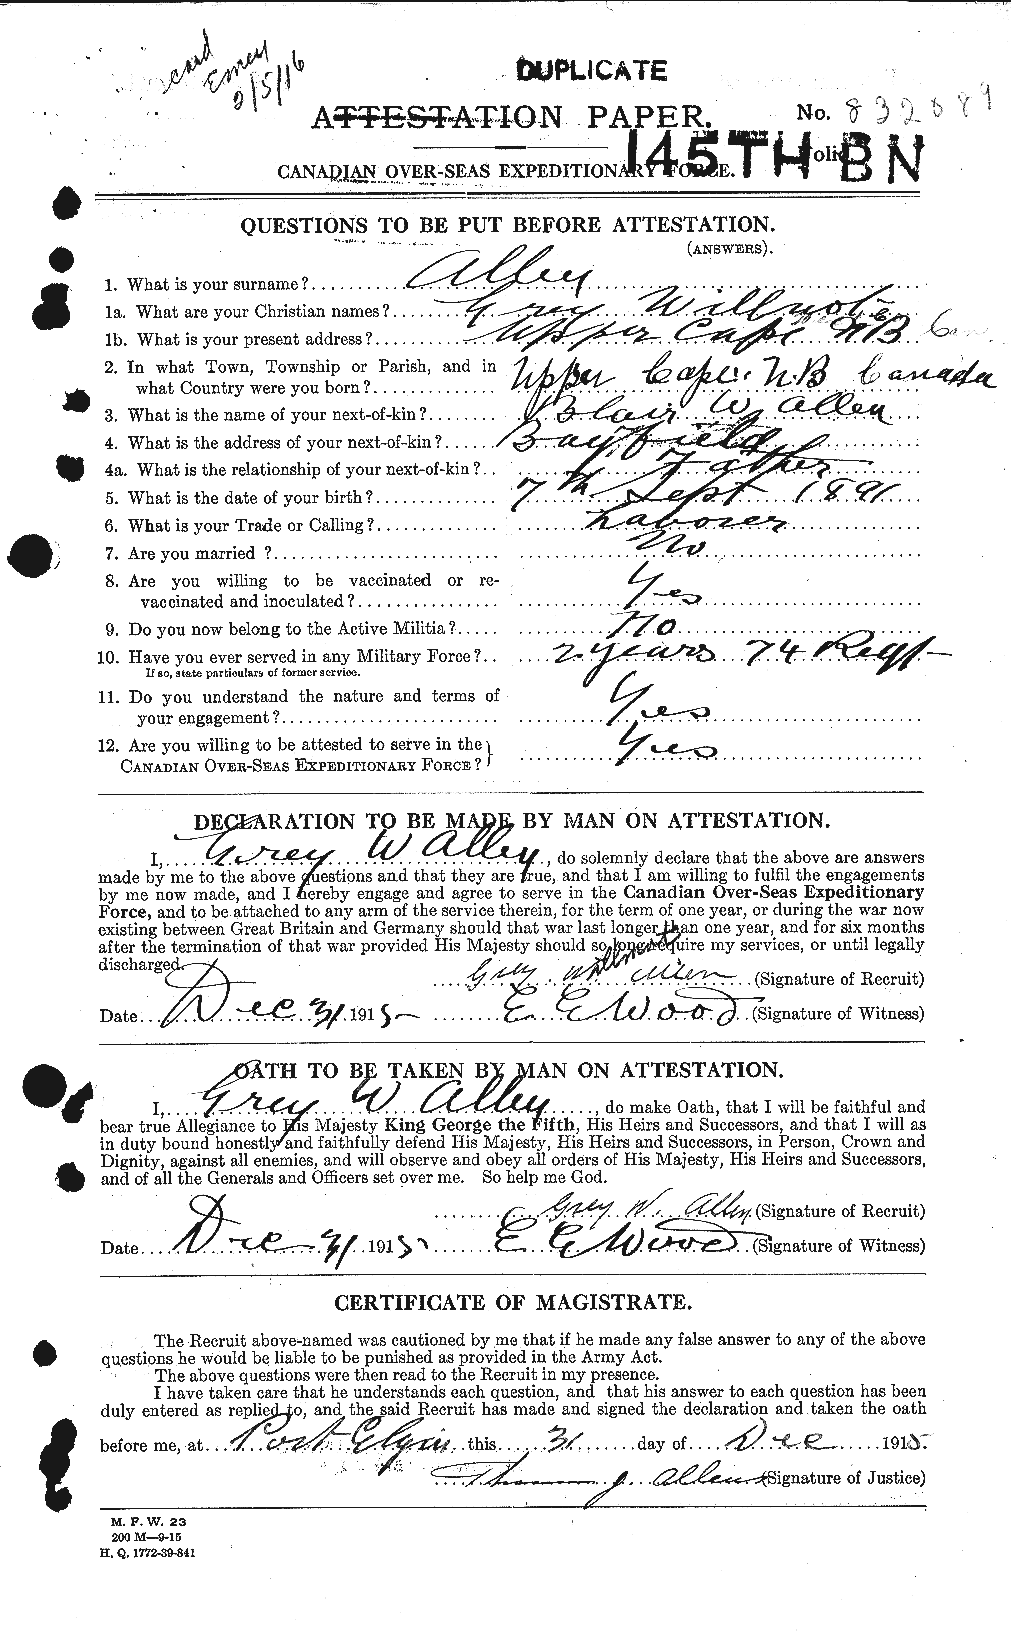 Personnel Records of the First World War - CEF 206314a